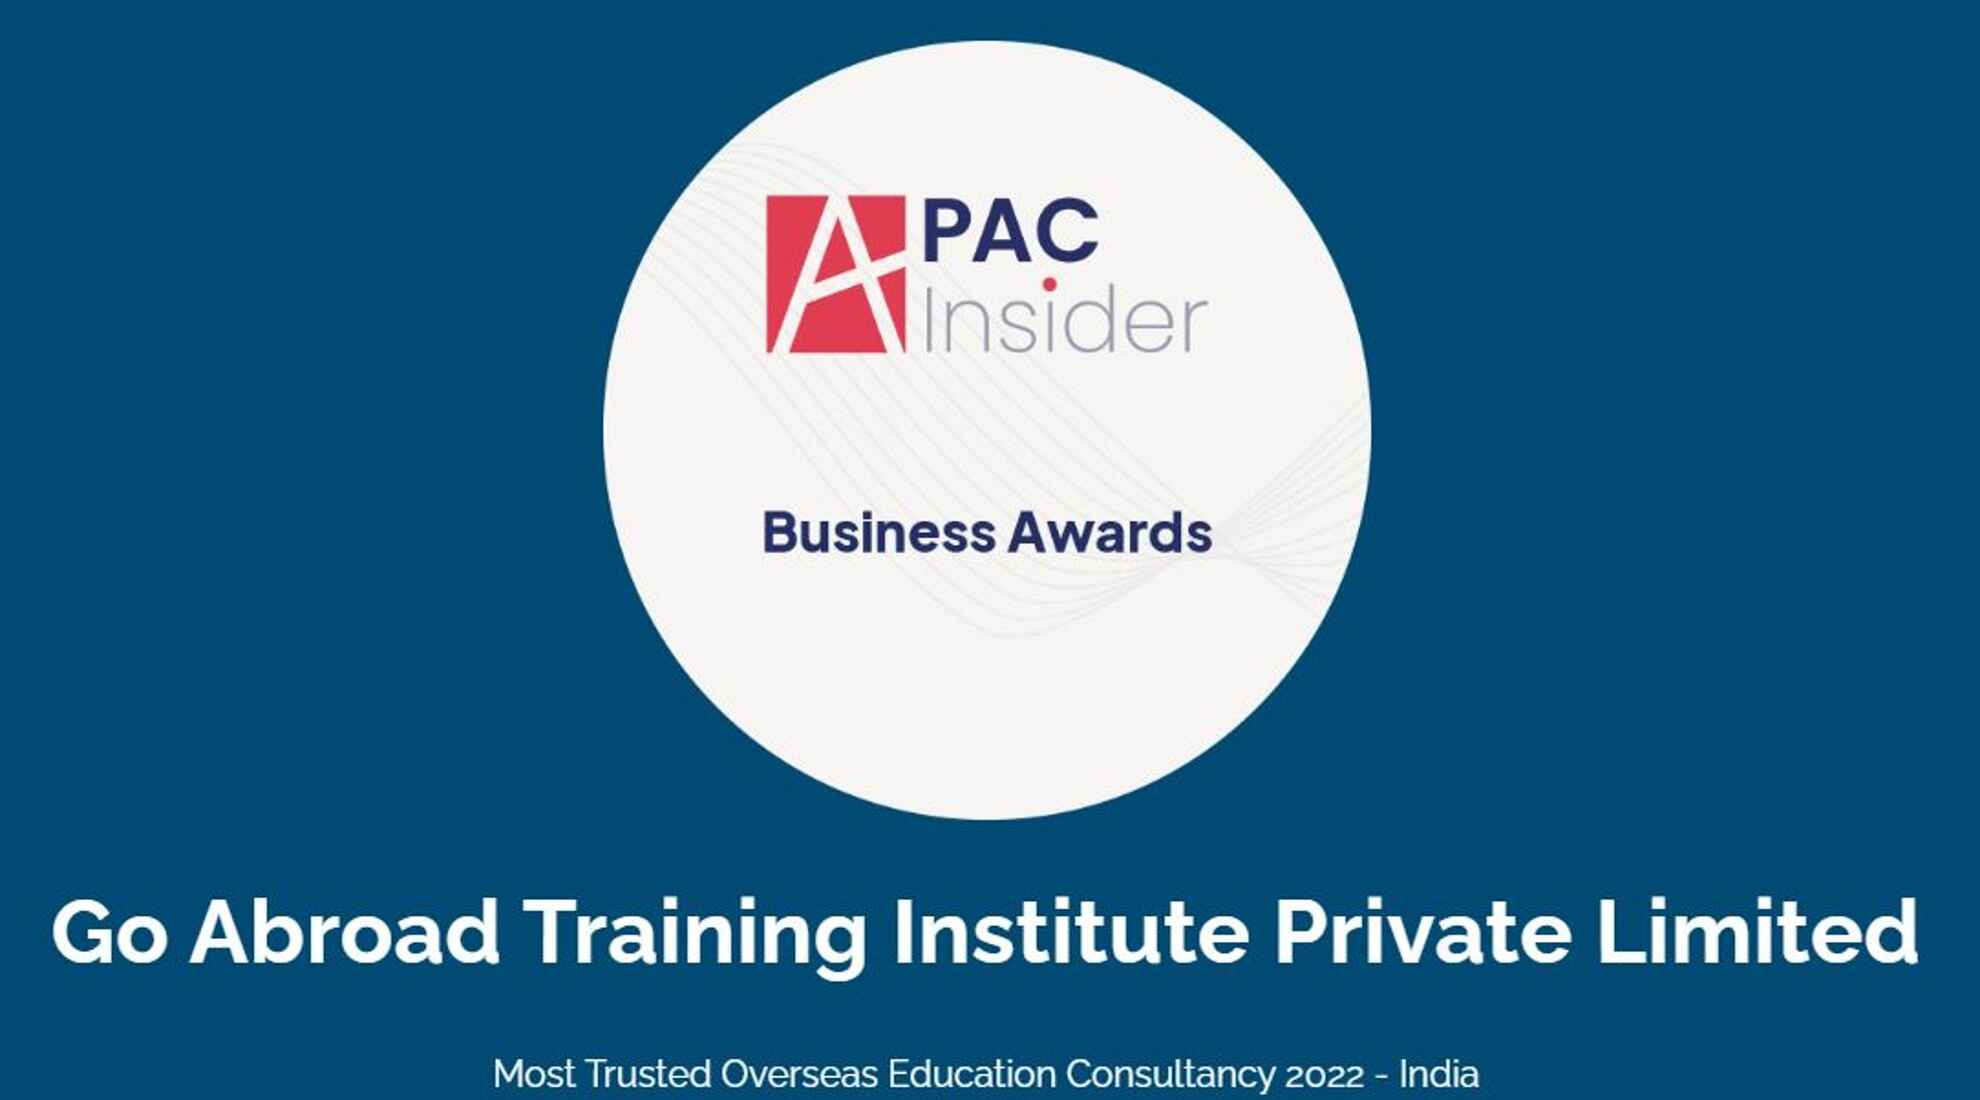 APAC Insider - Business Awards 2022 - Go Abroad Training Institute Private Limited - Most Trusted Overseas Education Consultancy in India